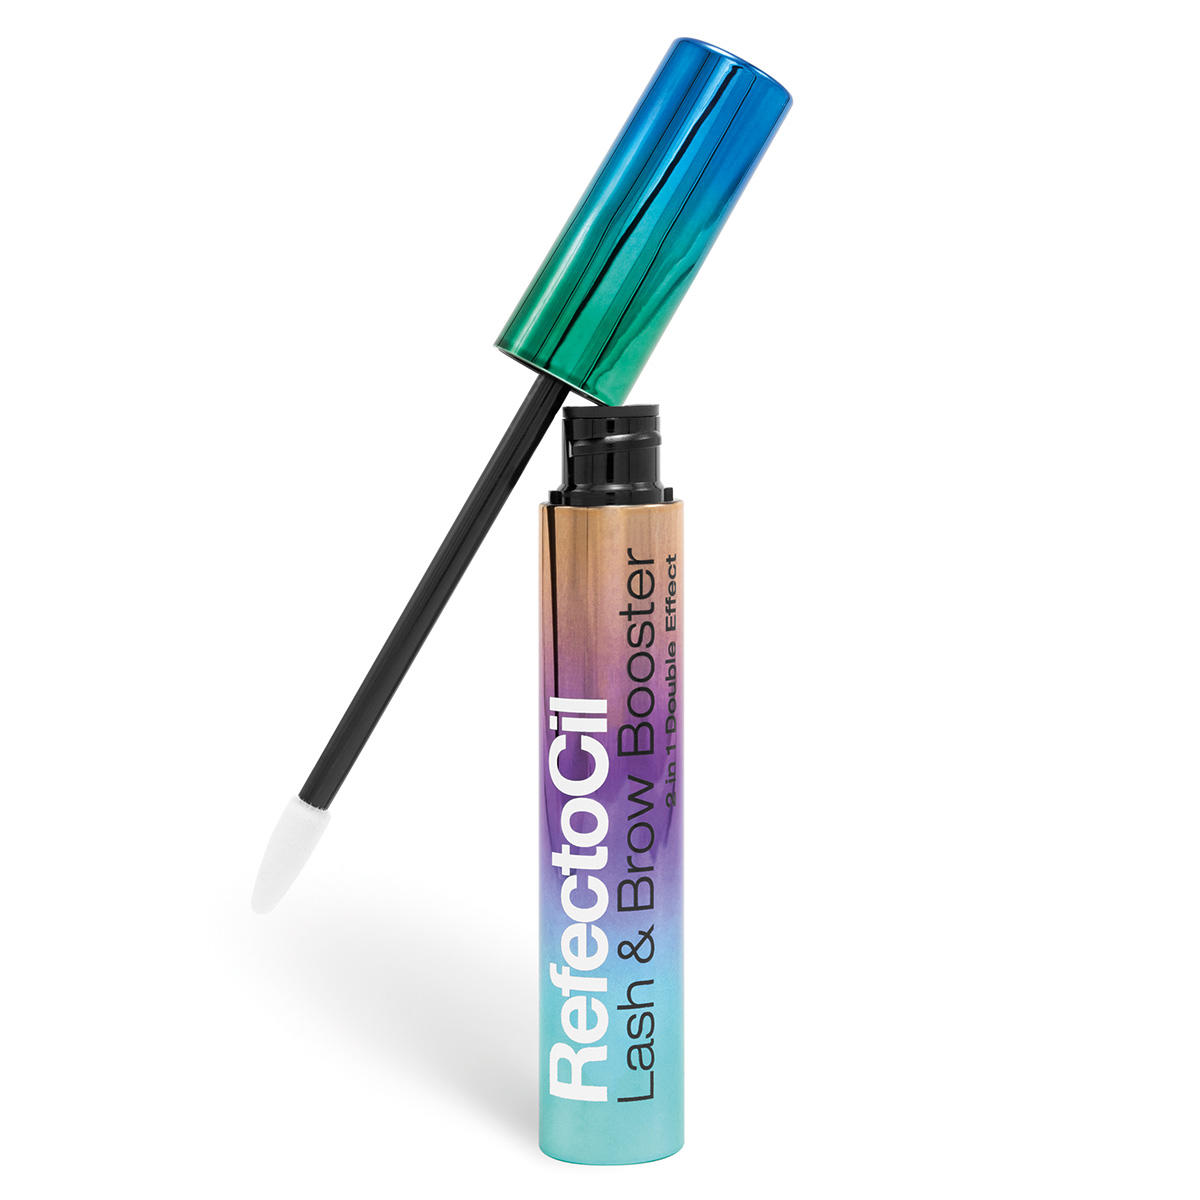 RefectoCil Lash & Brow Booster 2 in 1 Double Effect 6 ml - 2